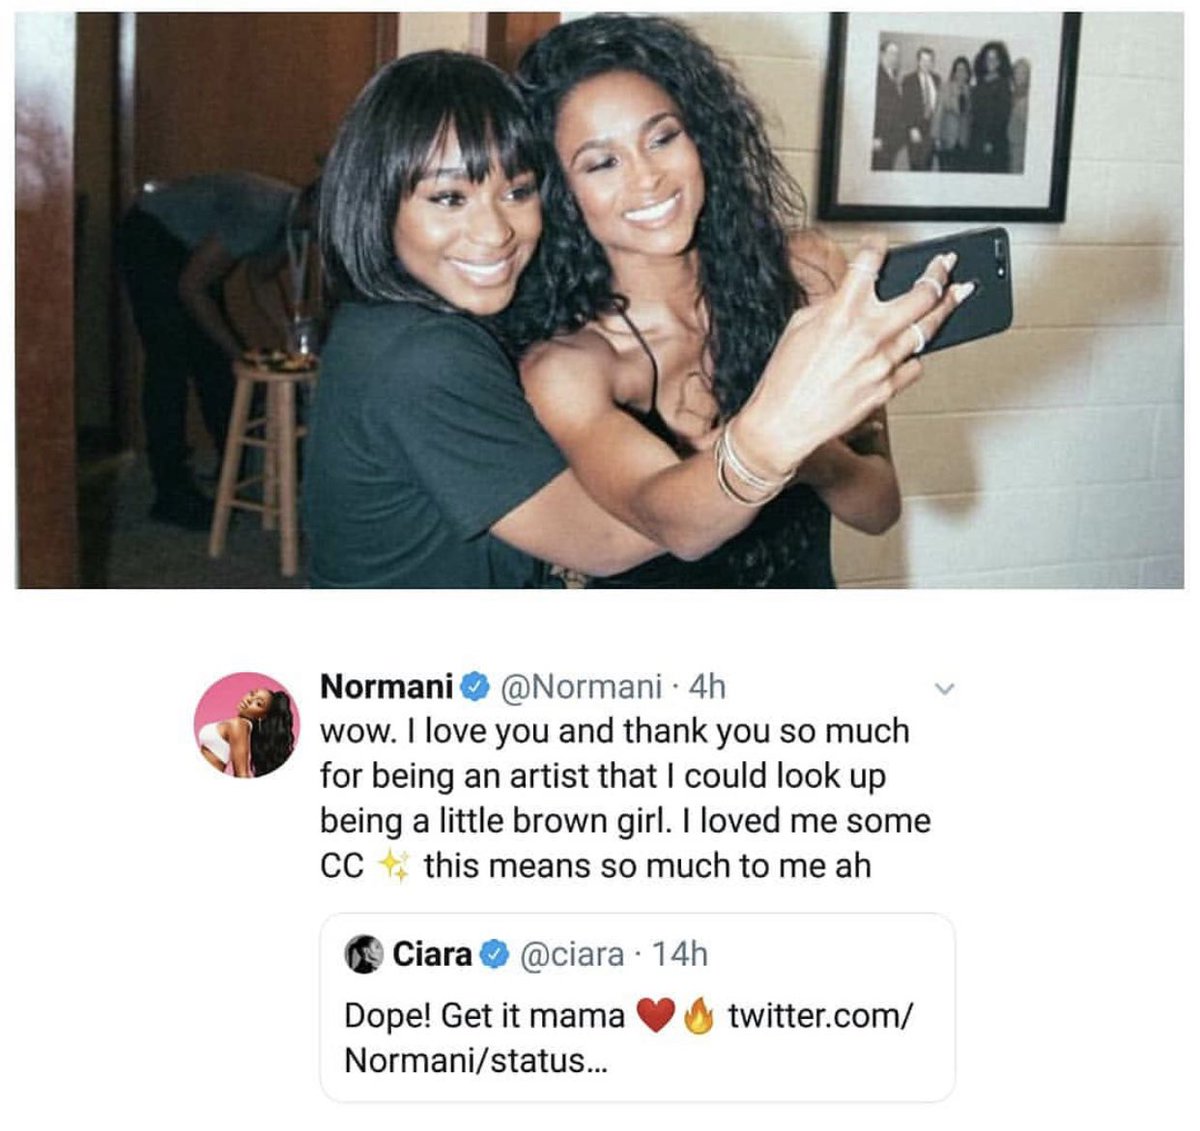 I couldn’t find your tweet to respond to, but seriously I know you work so hard, and it shows every time! You are carving out a lane of your own @Normani! The love you’ve shown me has also inspired me! #BlackGirlsRock ❤️